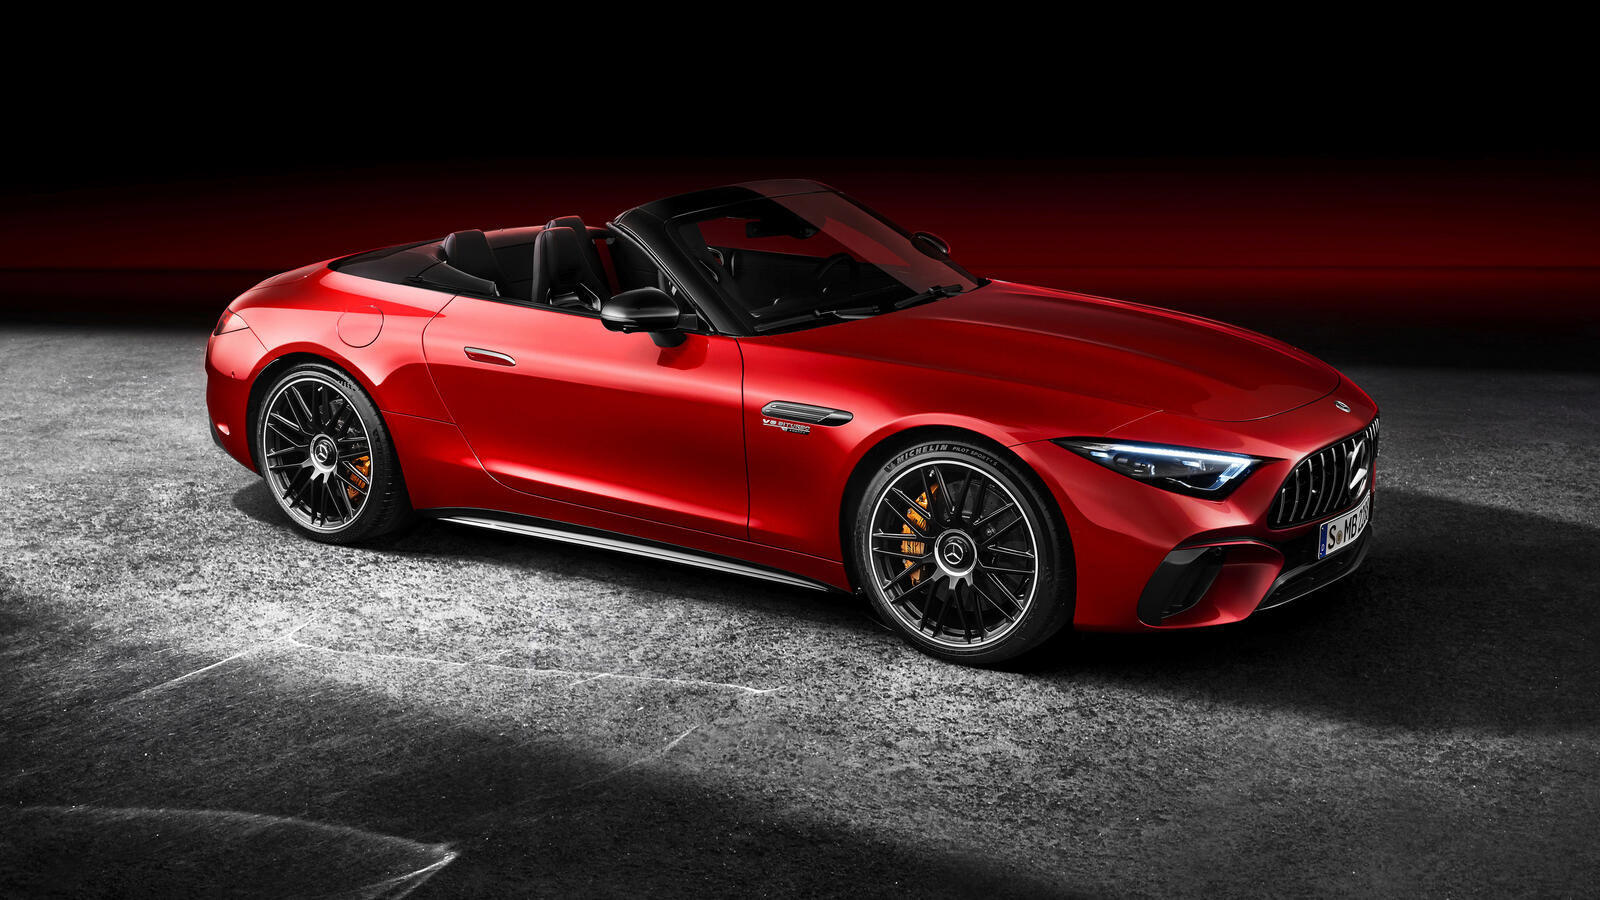 Free photo Mercedes-amg sl 63 convertible 2022 in beautiful red